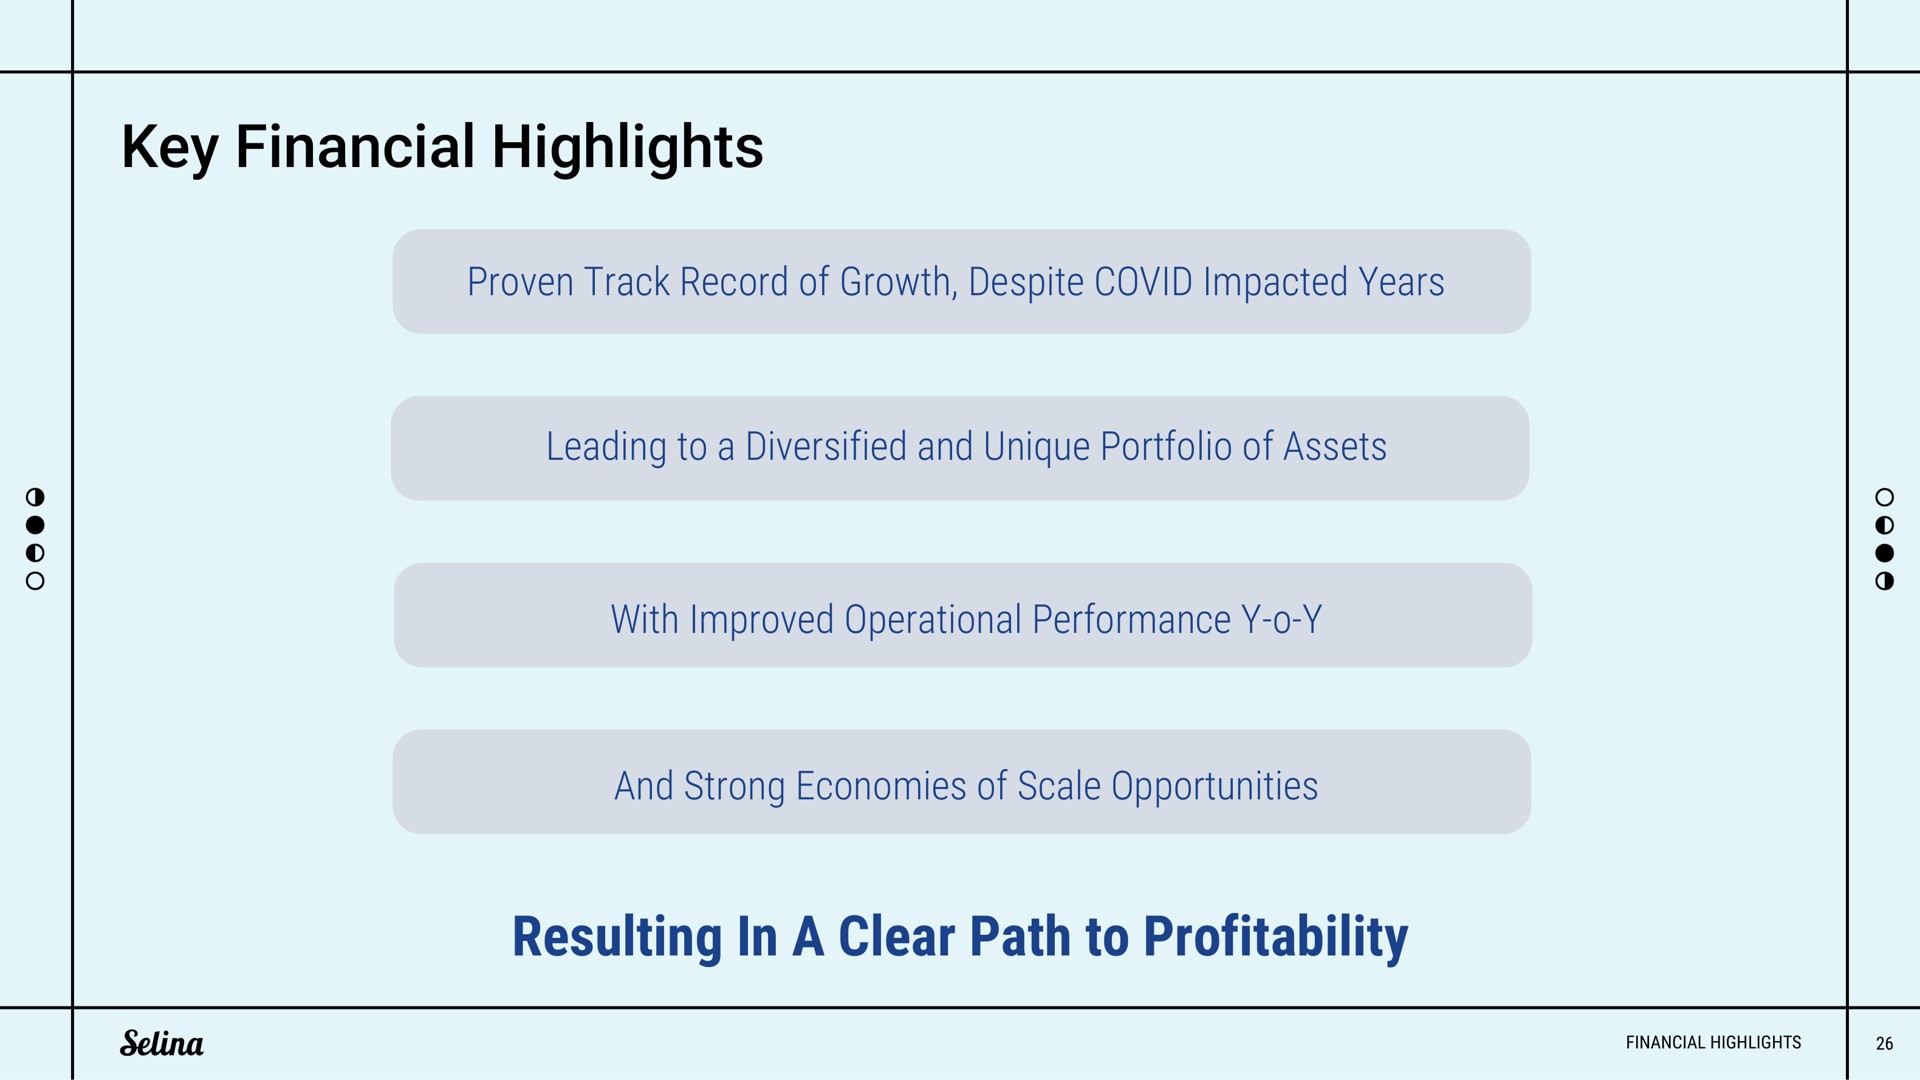 key financial highlights proven track record of growth despite covid impacted years leading to a diversified and unique portfolio of assets with improved operational performance and strong economies of scale opportunities resulting in a clear path to profitability | Selina